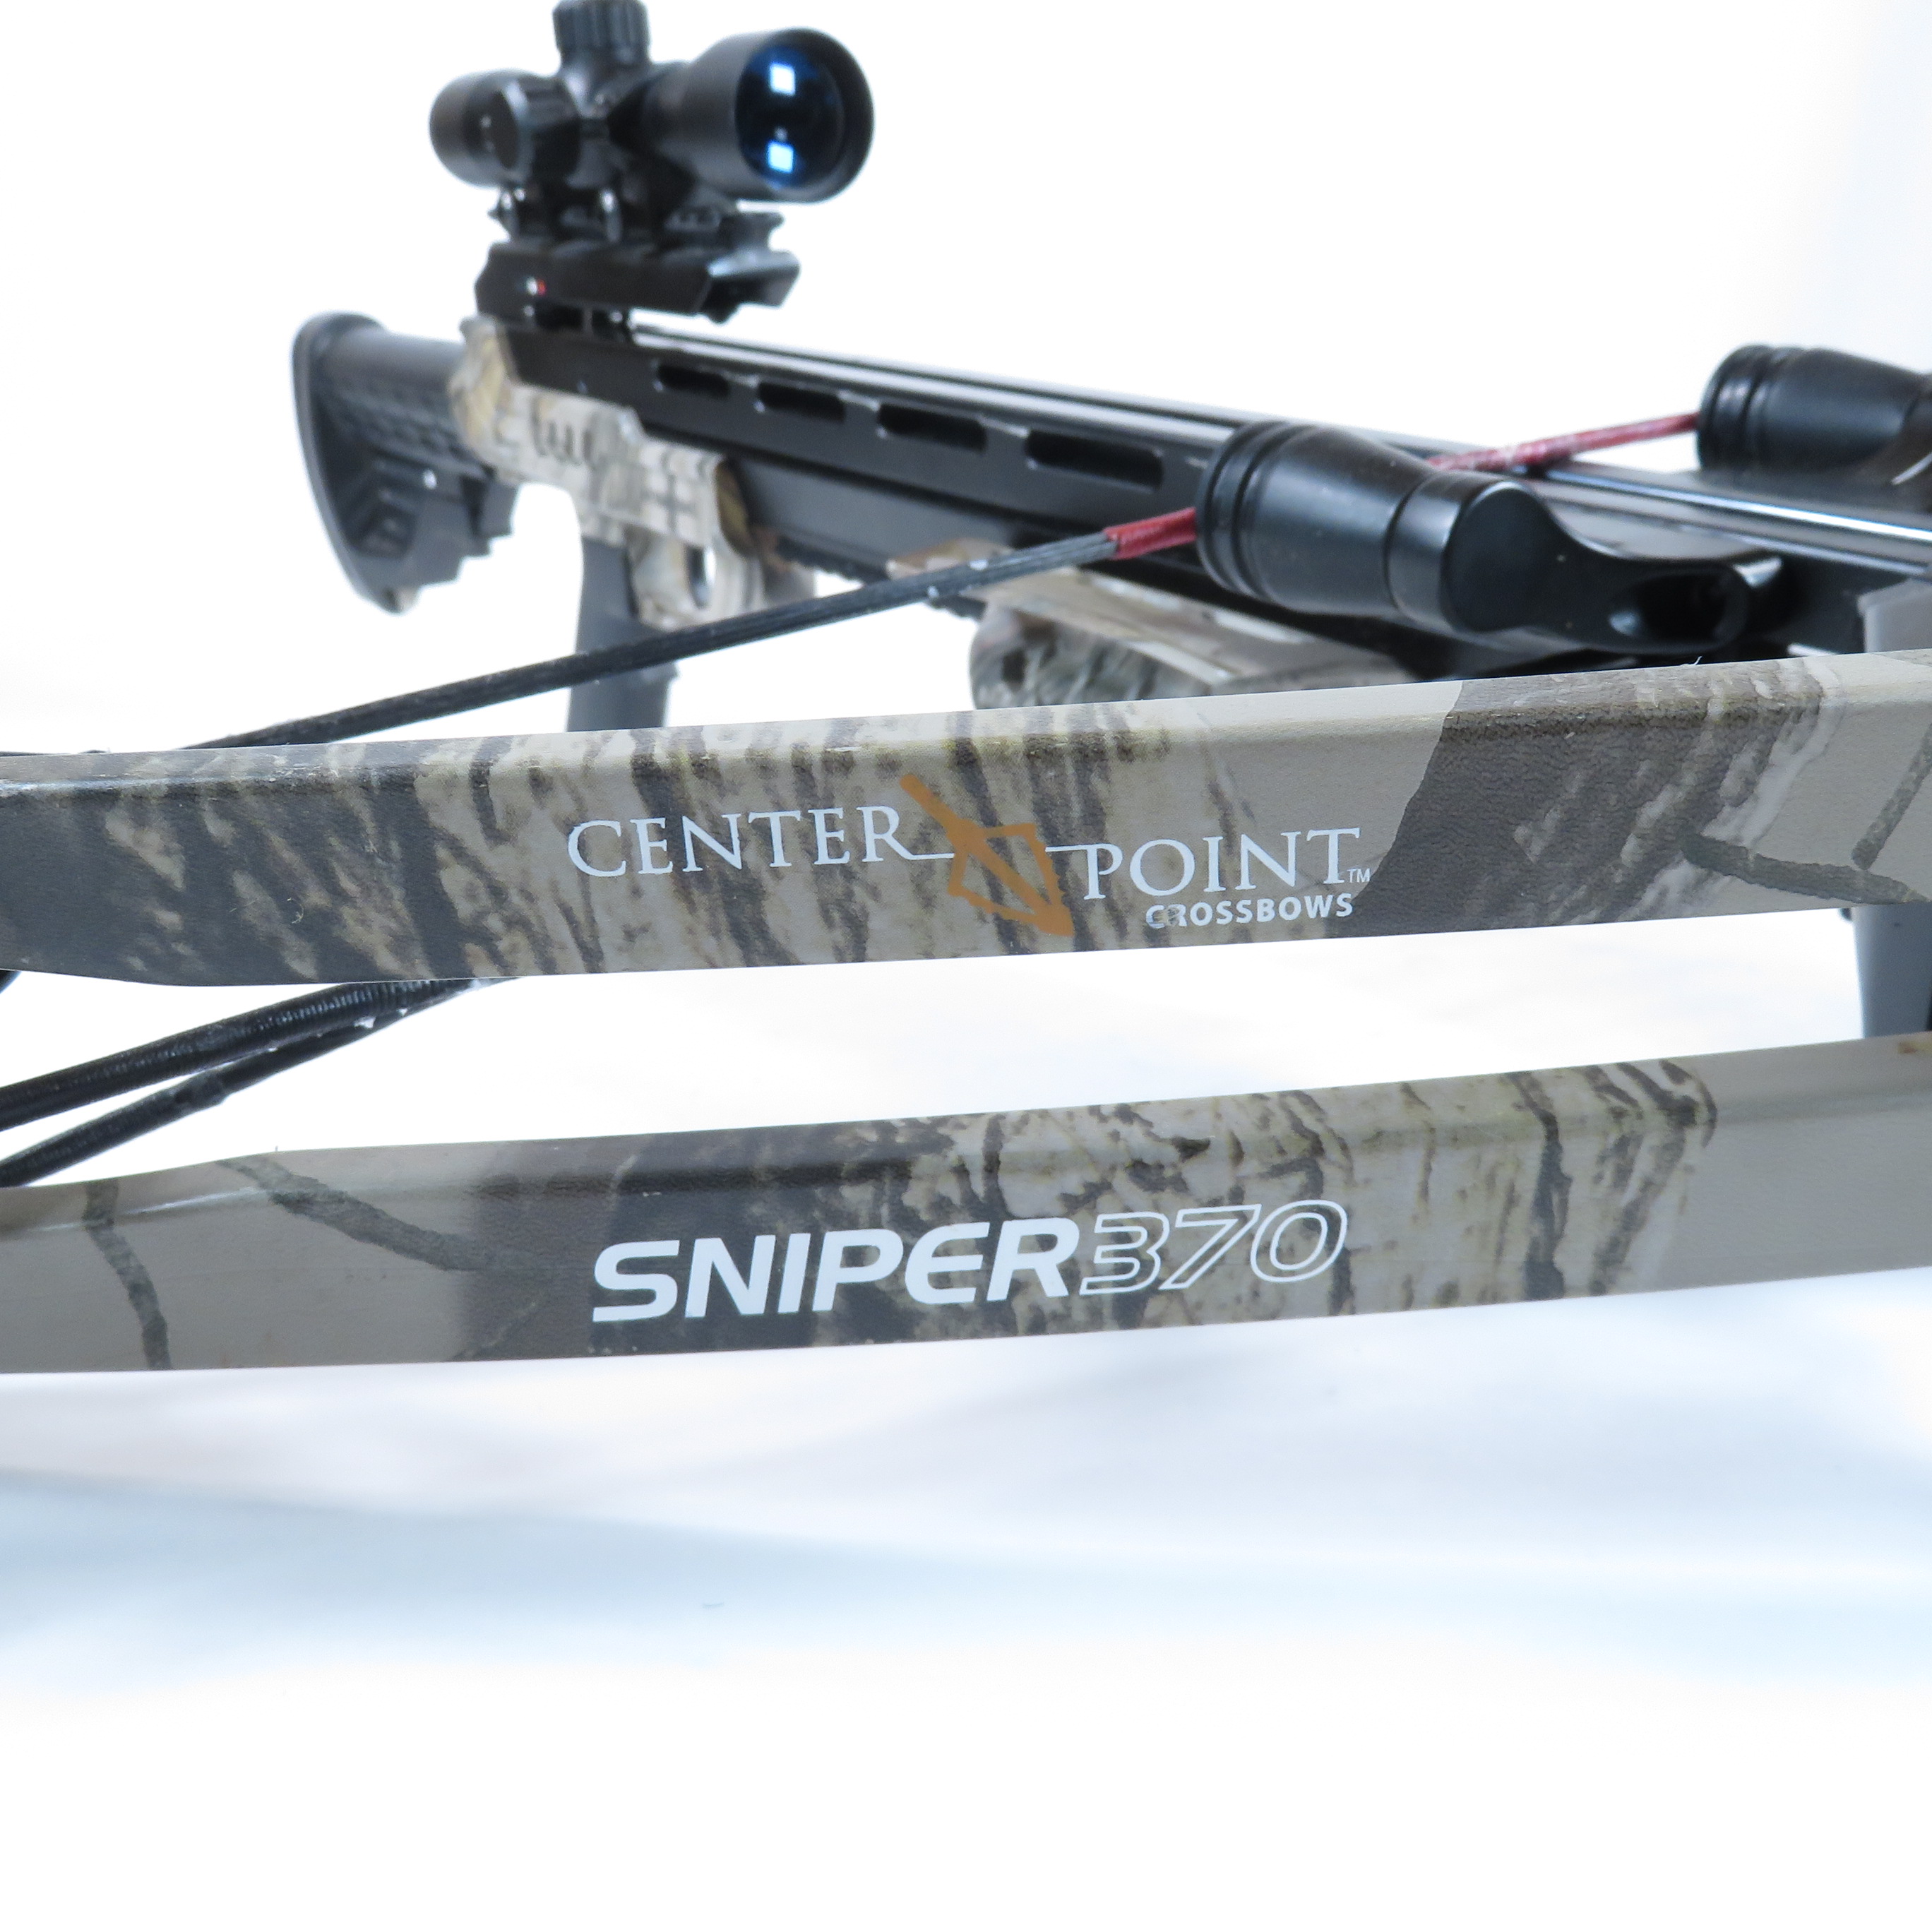 CenterPoint Sniper 370 Camo 370 FPS Hunting Compound Crossbow